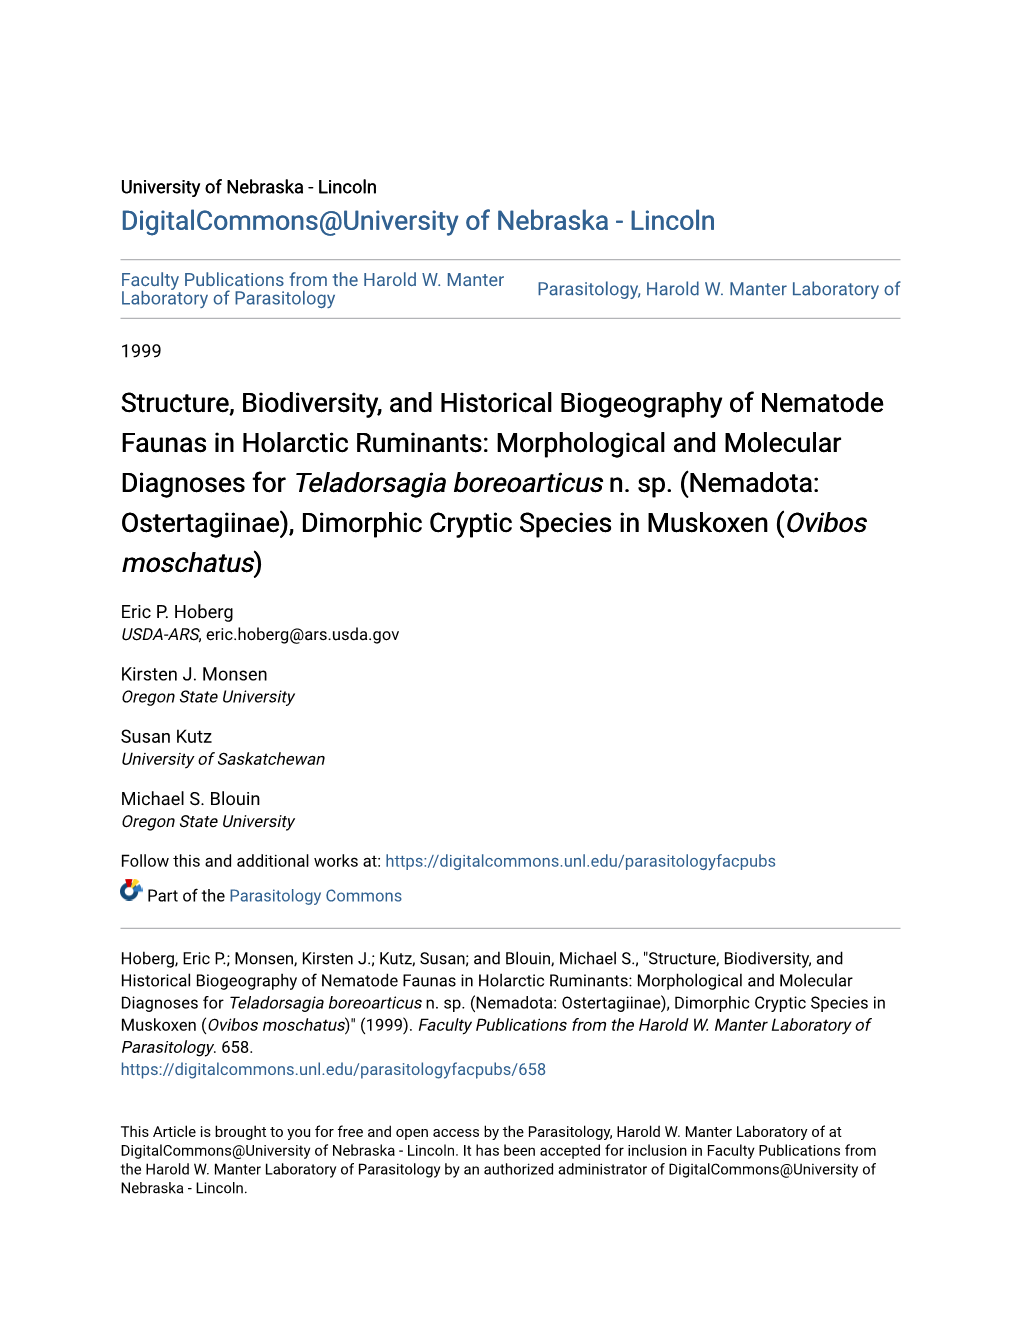 Structure, Biodiversity, and Historical Biogeography of Nematode Faunas in Holarctic Ruminants: Morphological and Molecular Diagnoses for Teladorsagia Boreoarticus N